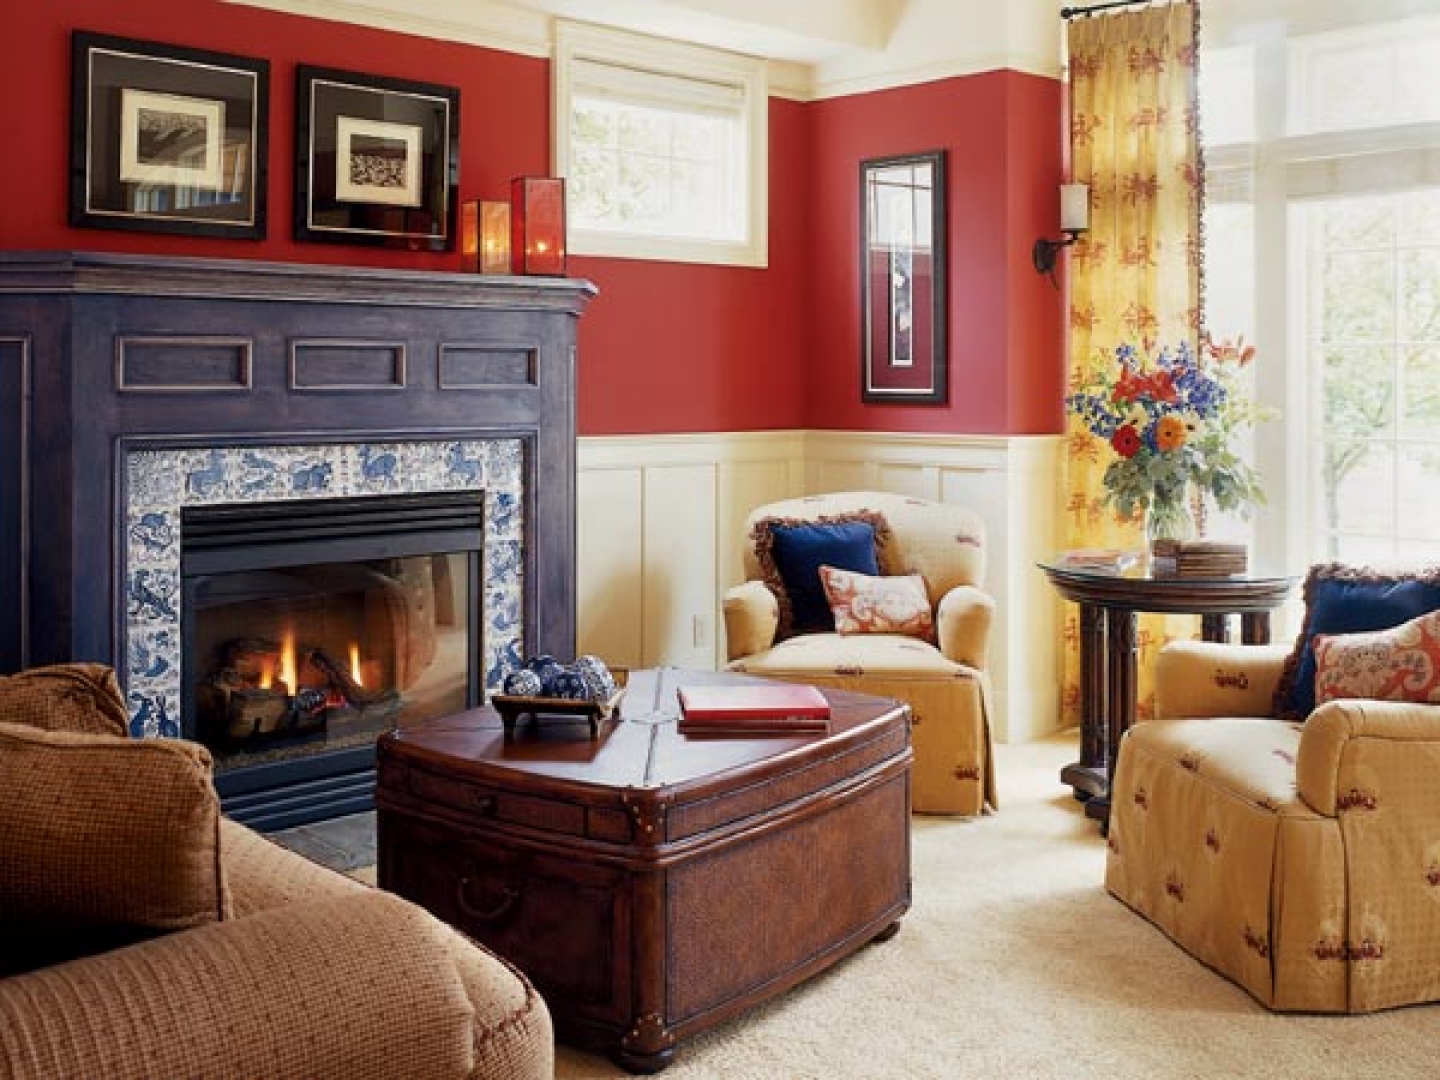 Uncover 87+ Striking Small Living Room With Red Wall Decor Ideas Top Choices Of Architects